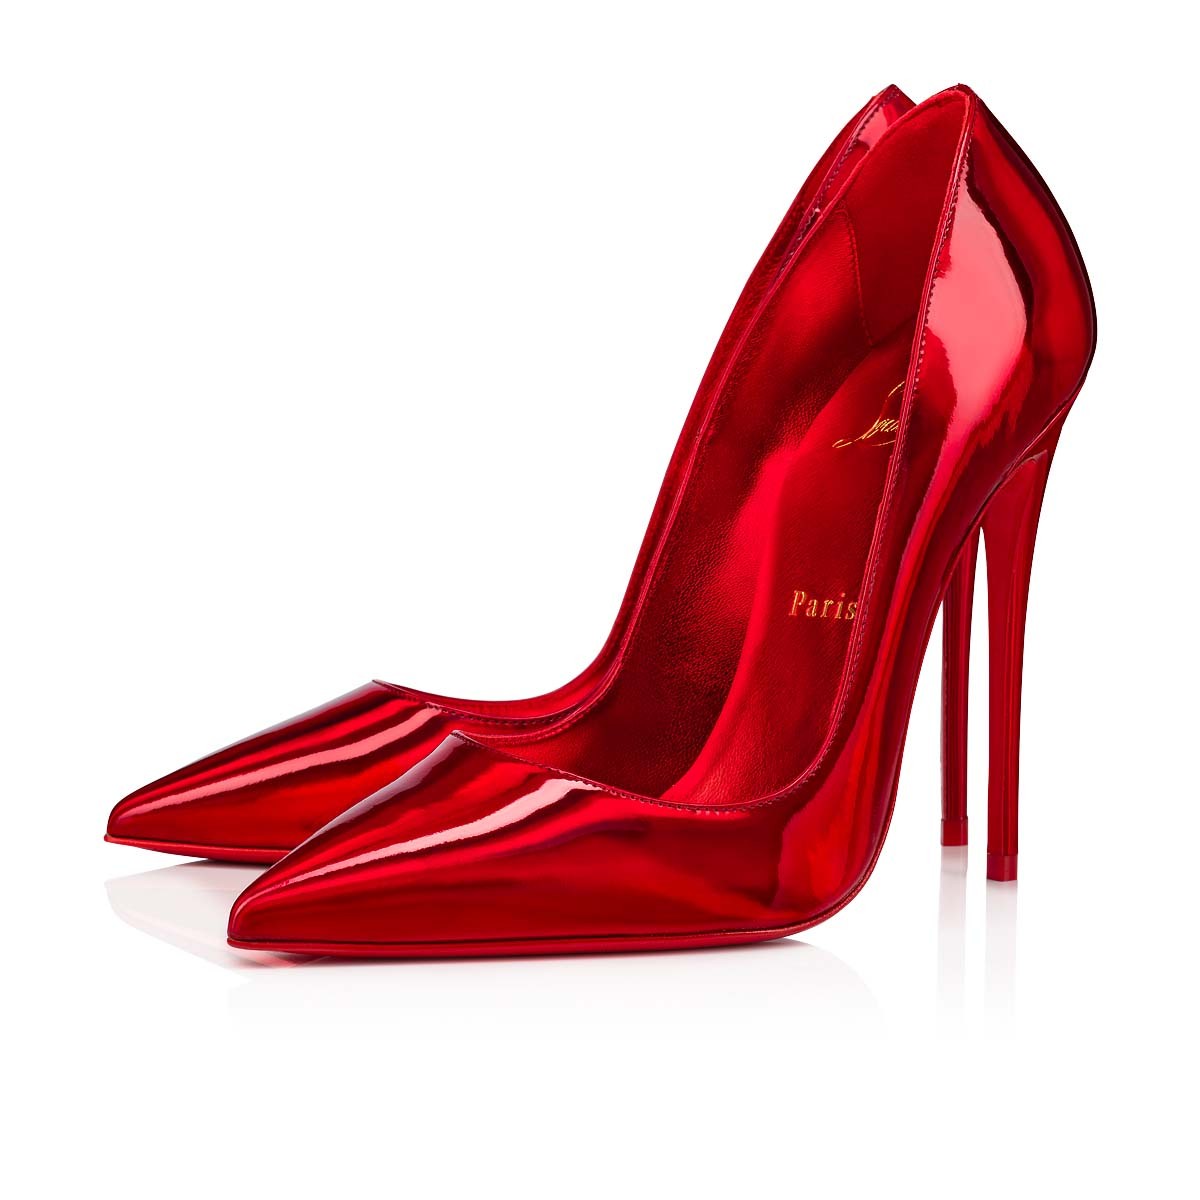 So Kate 100 mm Pumps Loubi Patent Calf Psychic Red